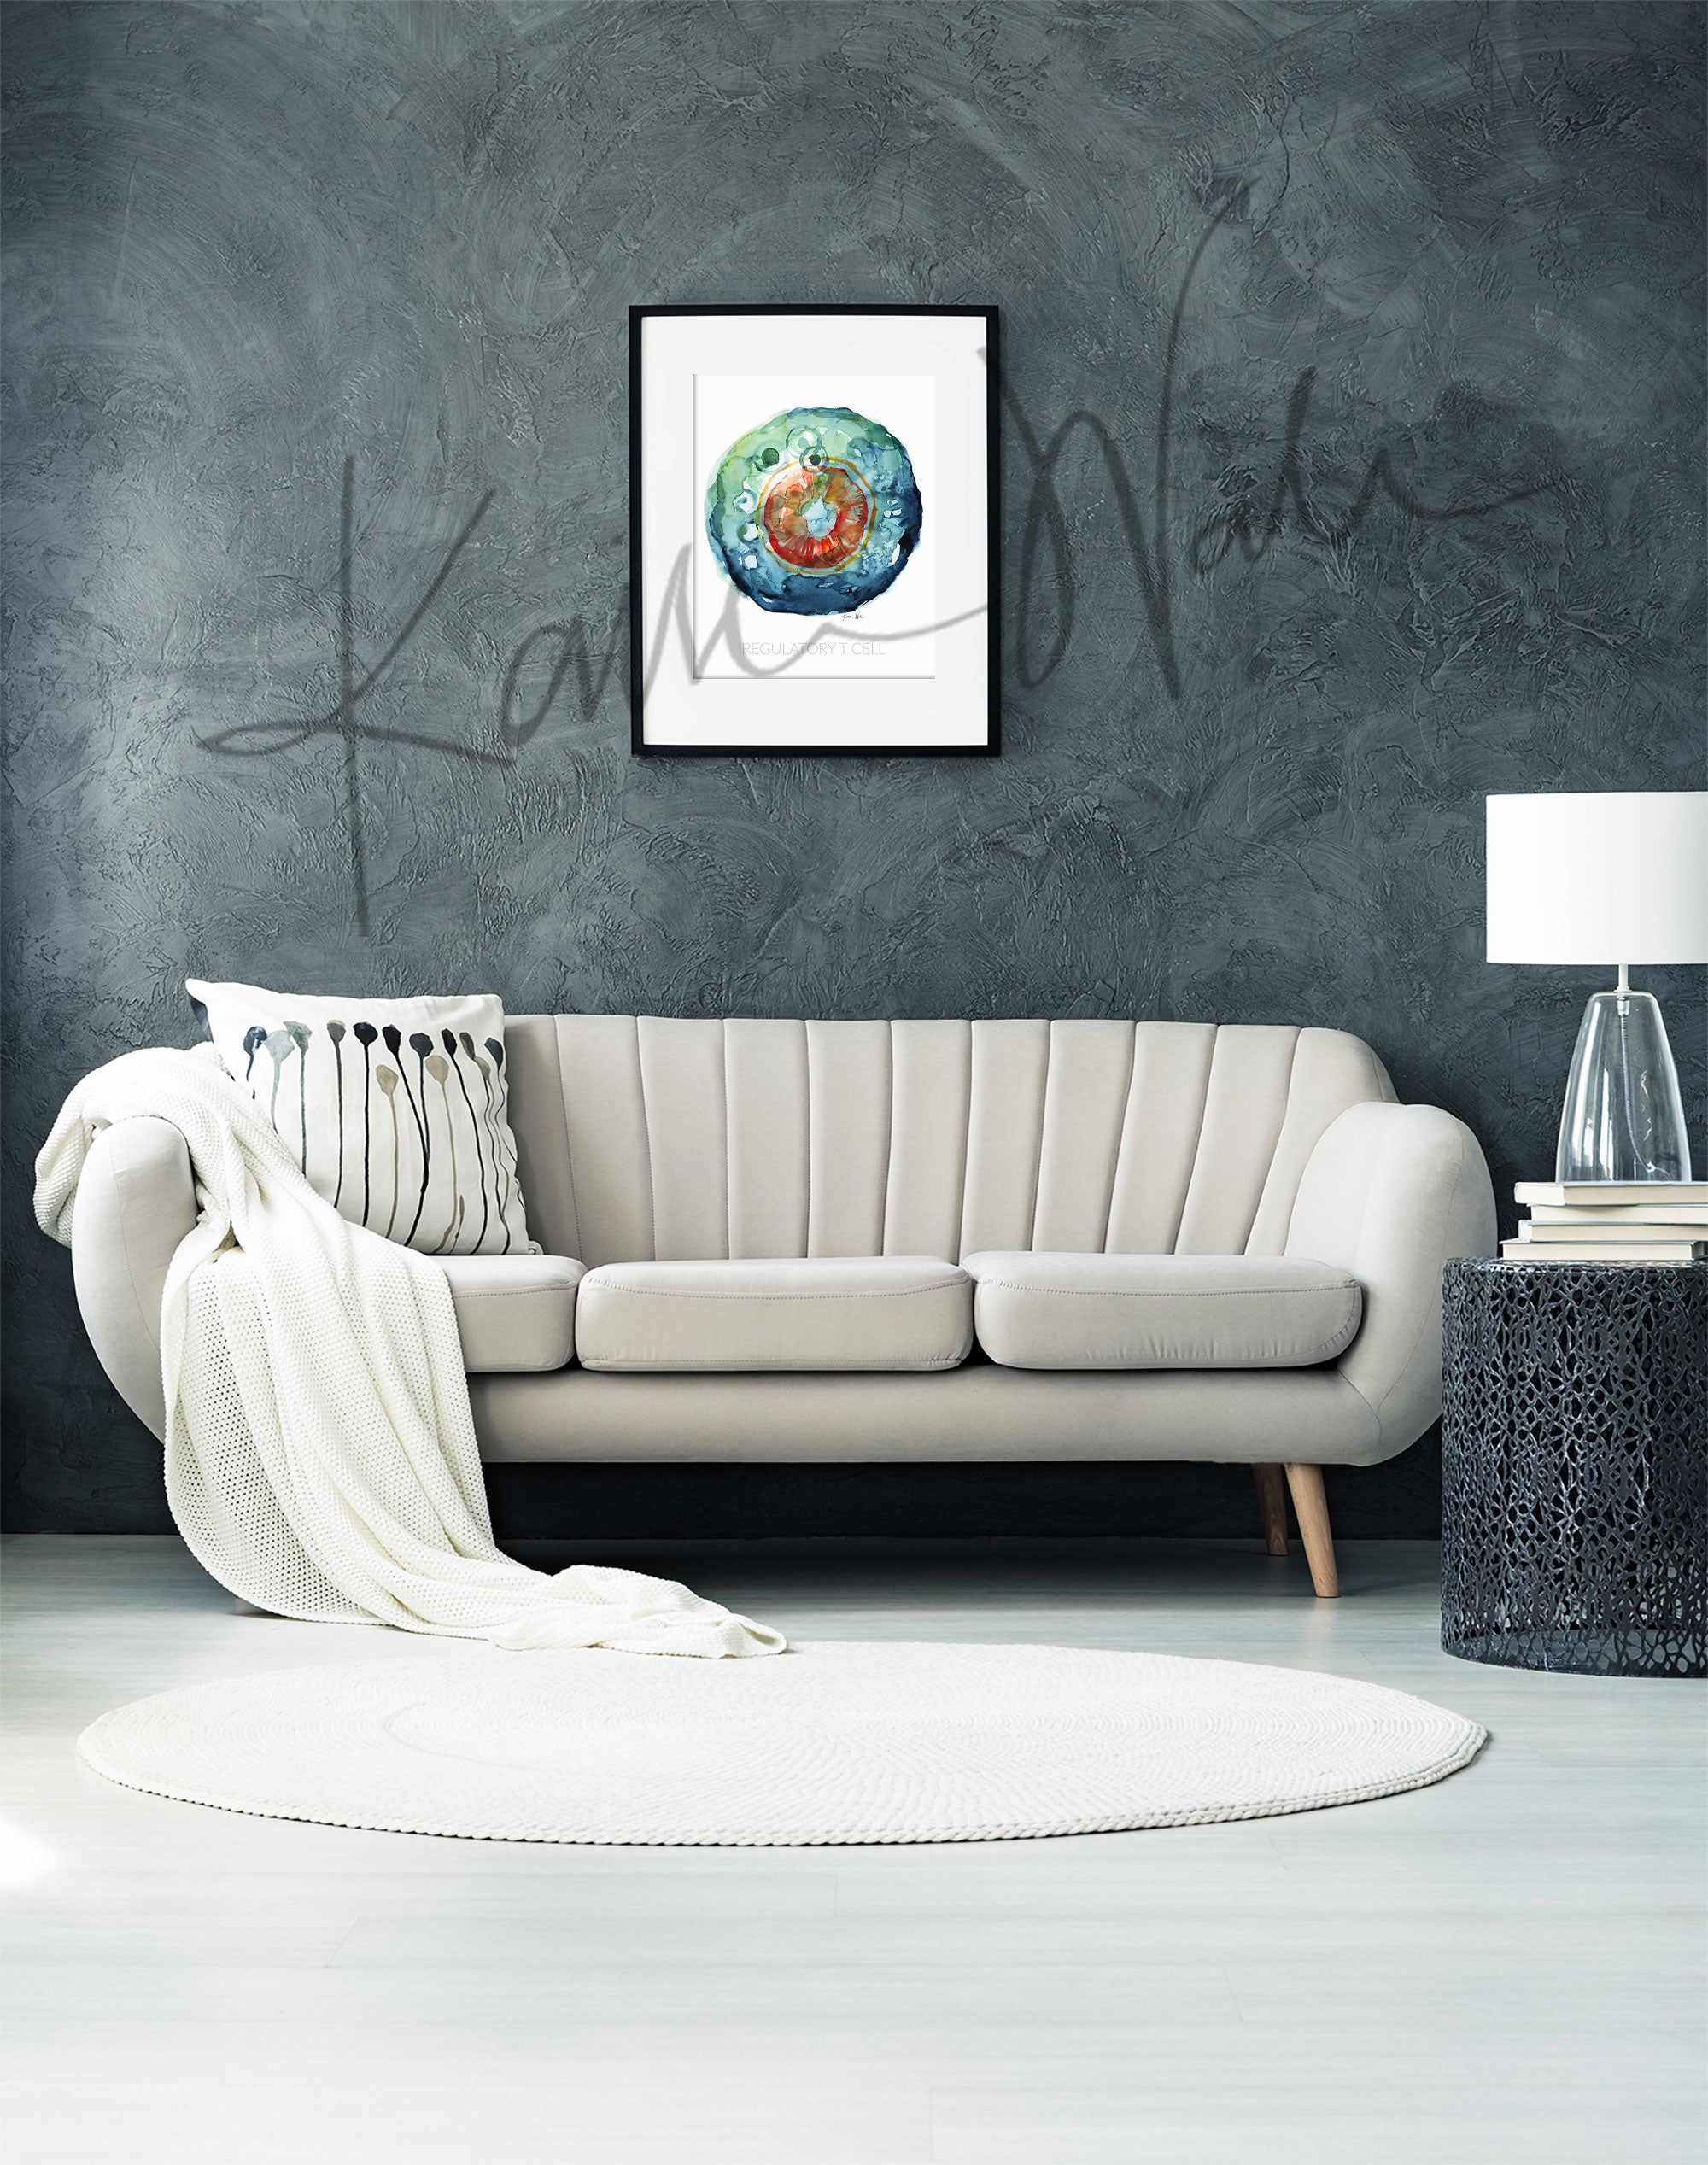 Framed watercolor painting of a regulatory T cell. The painting is hanging over a white couch.